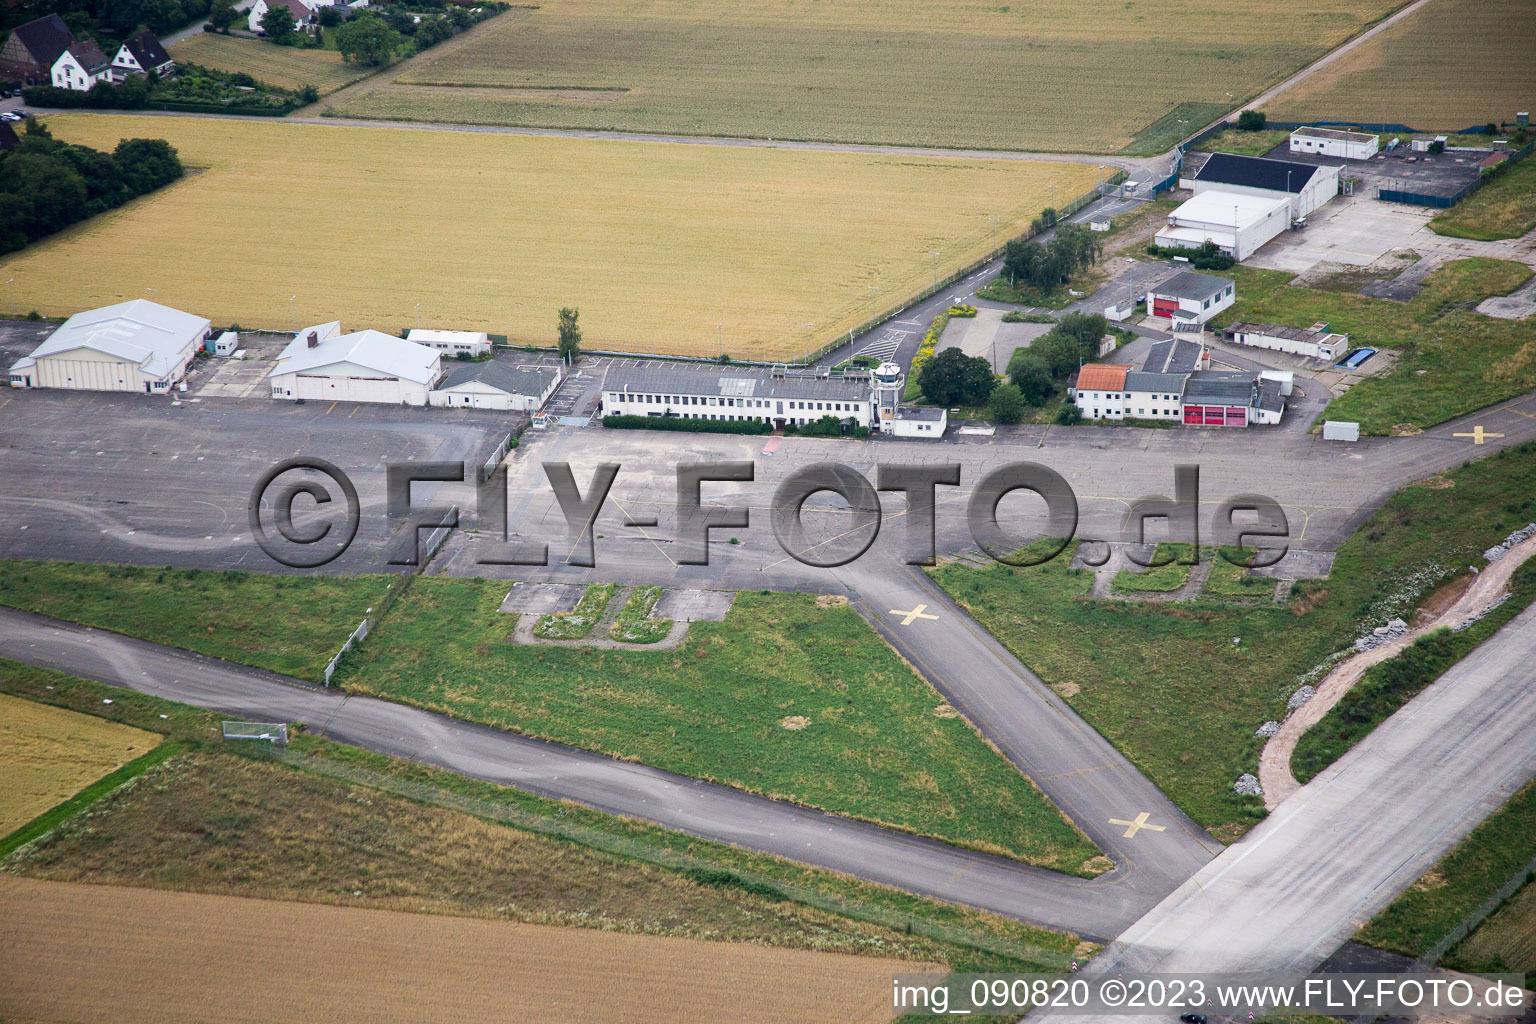 HD-Kirchheim, former American airfield in the district Patrick Henry Village in Heidelberg in the state Baden-Wuerttemberg, Germany